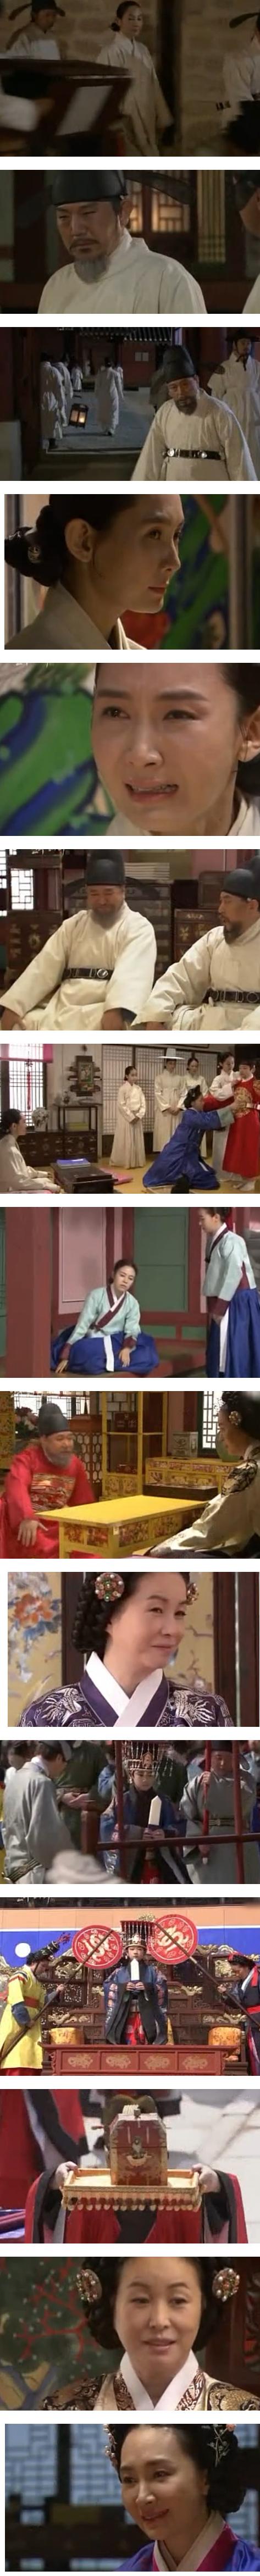 episodes 33 and 34 captures for the Korean drama 'Queen Insoo'